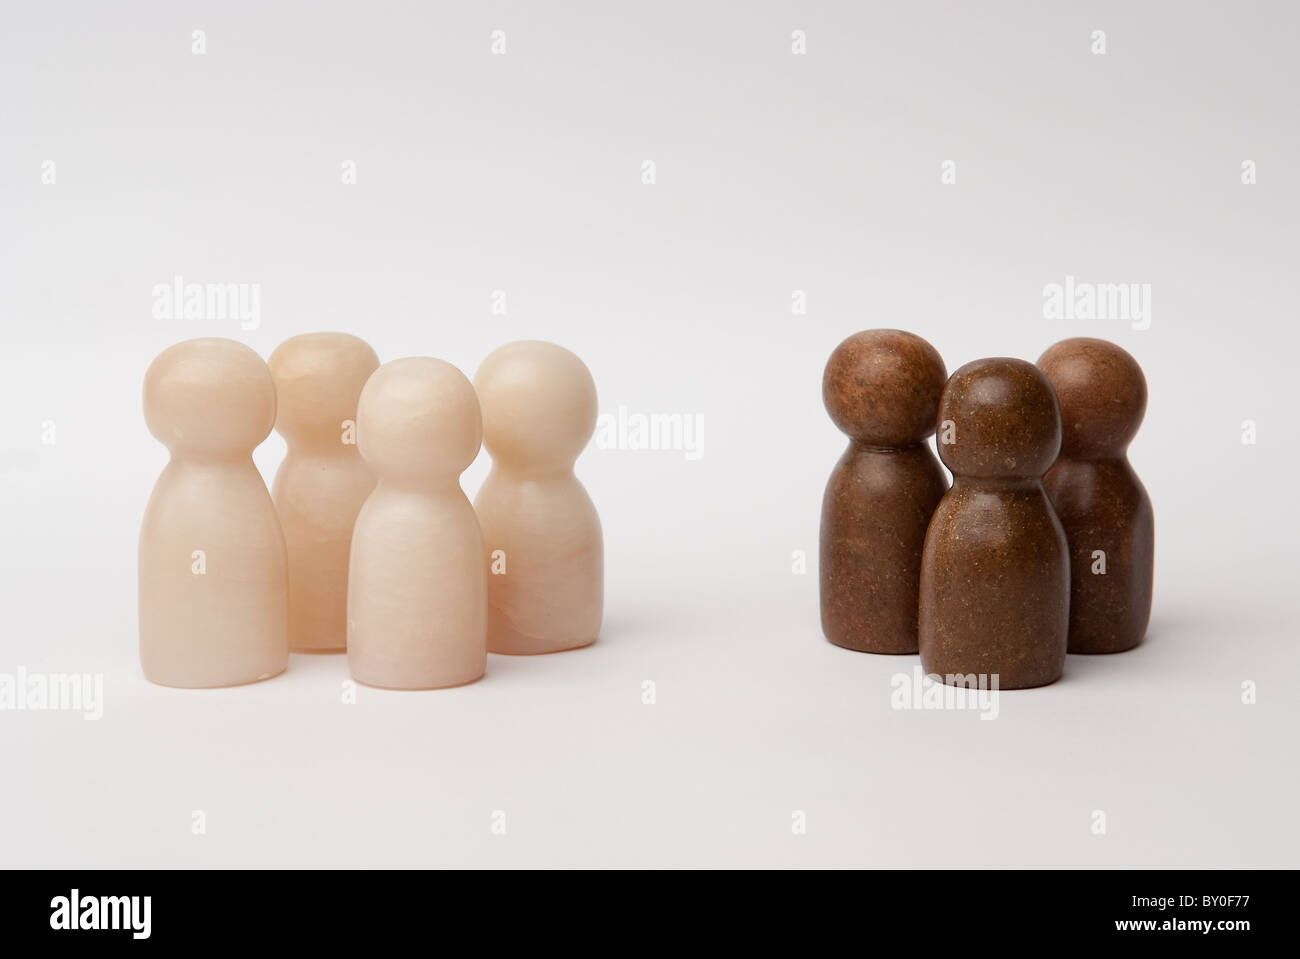 4 white and 3 brown figures, building 2 seperate groups Stock Photo